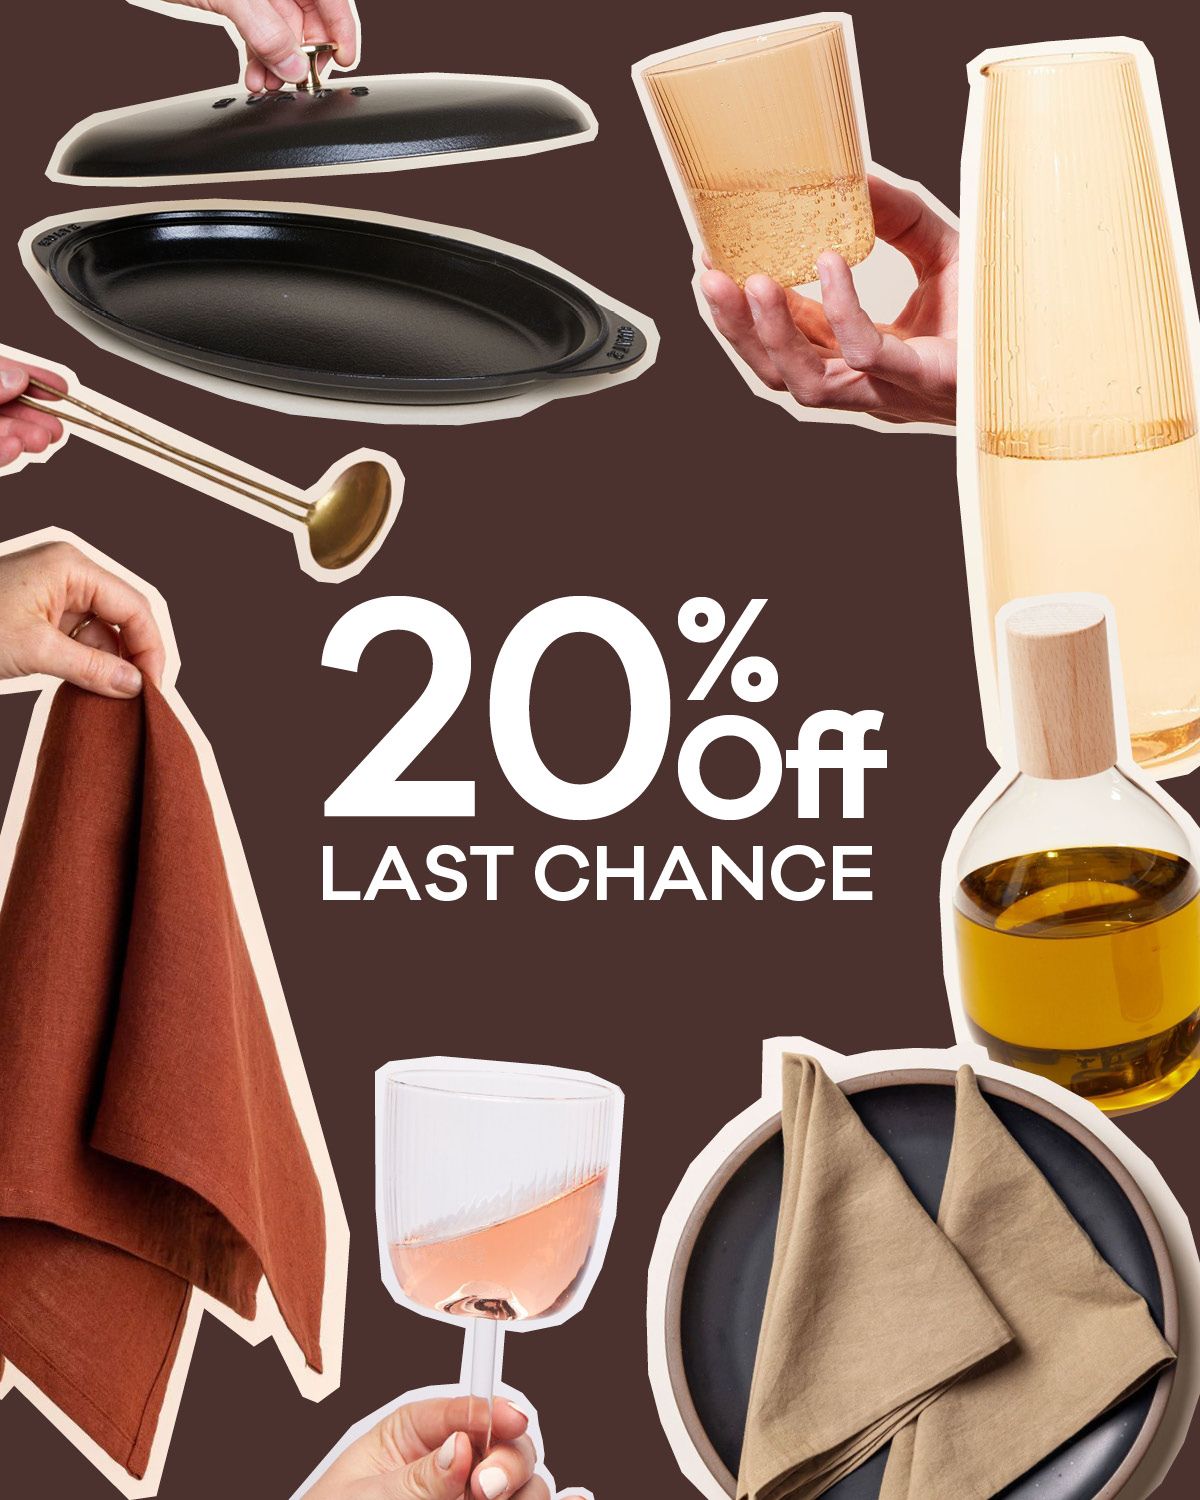 A collage of various items all against a brown background and centered is text that reads "20% Off Last Chance". Items include dinner napkins, wine glasses, an iron fish pan, a brass ladle, and a glass bottle filled with olive oil.